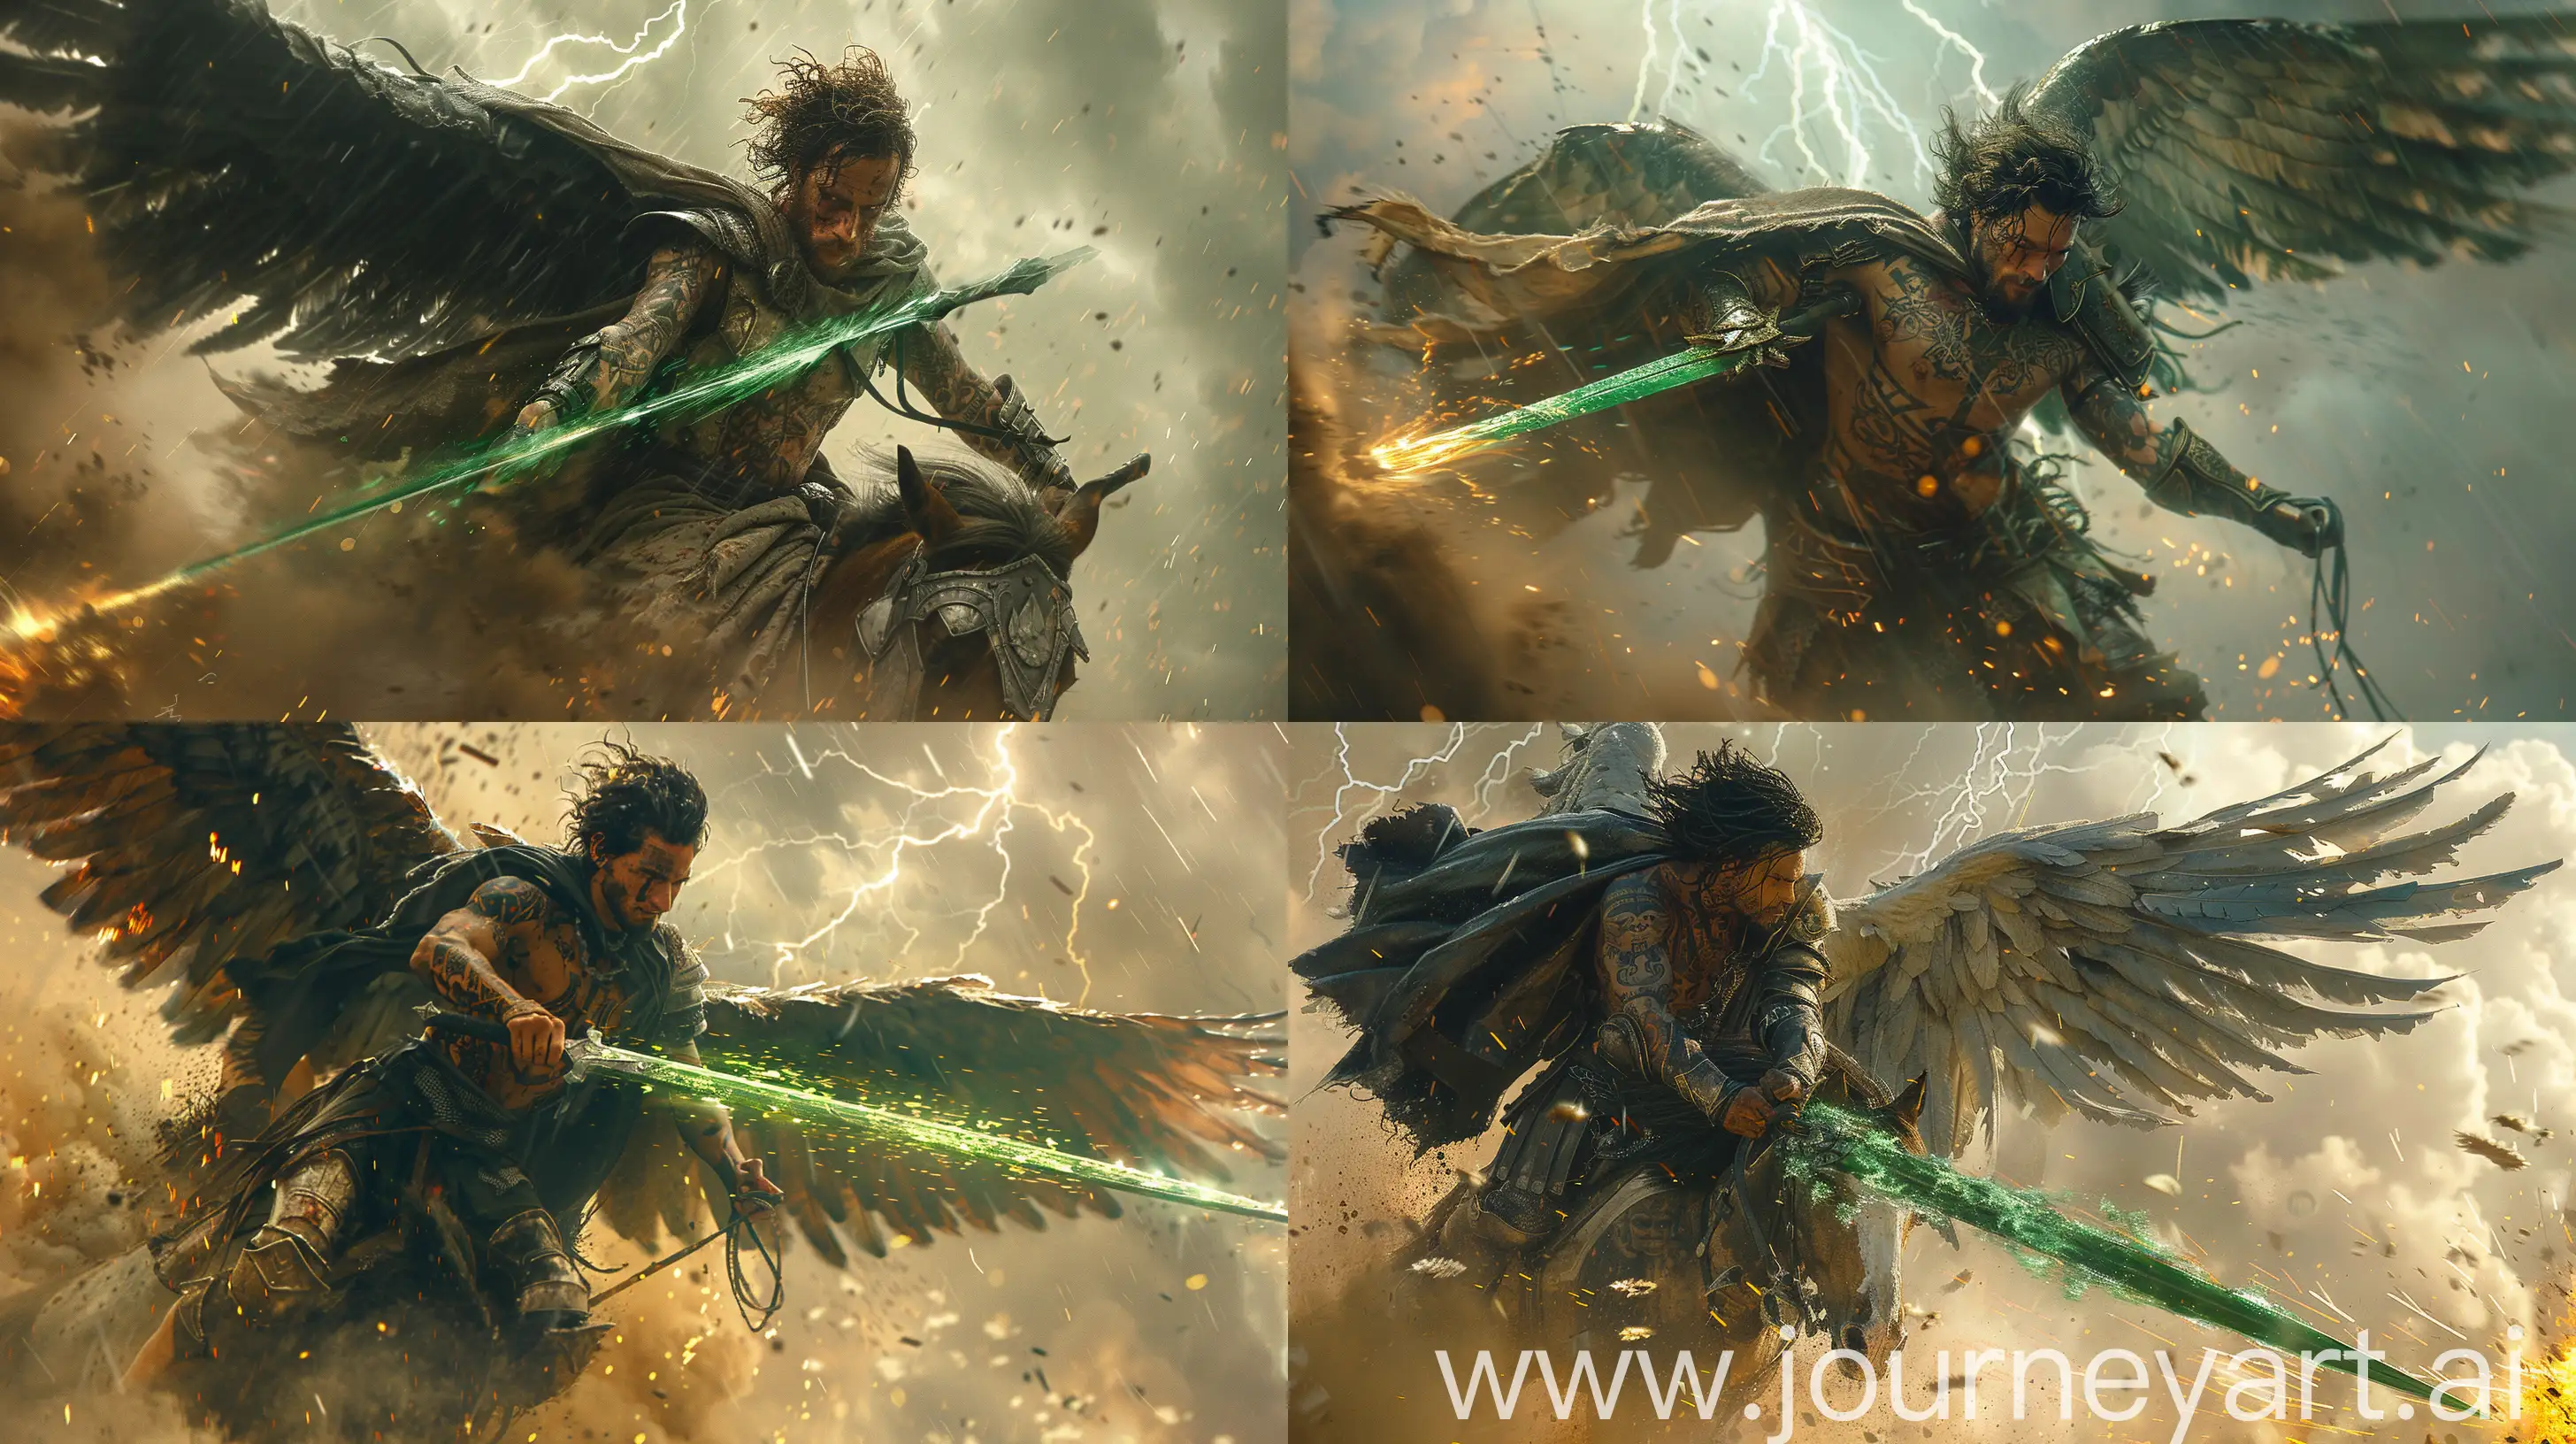 Epic-Fantasy-Art-German-Winged-Angel-Riding-Armored-Horse-with-Flaming-Sword